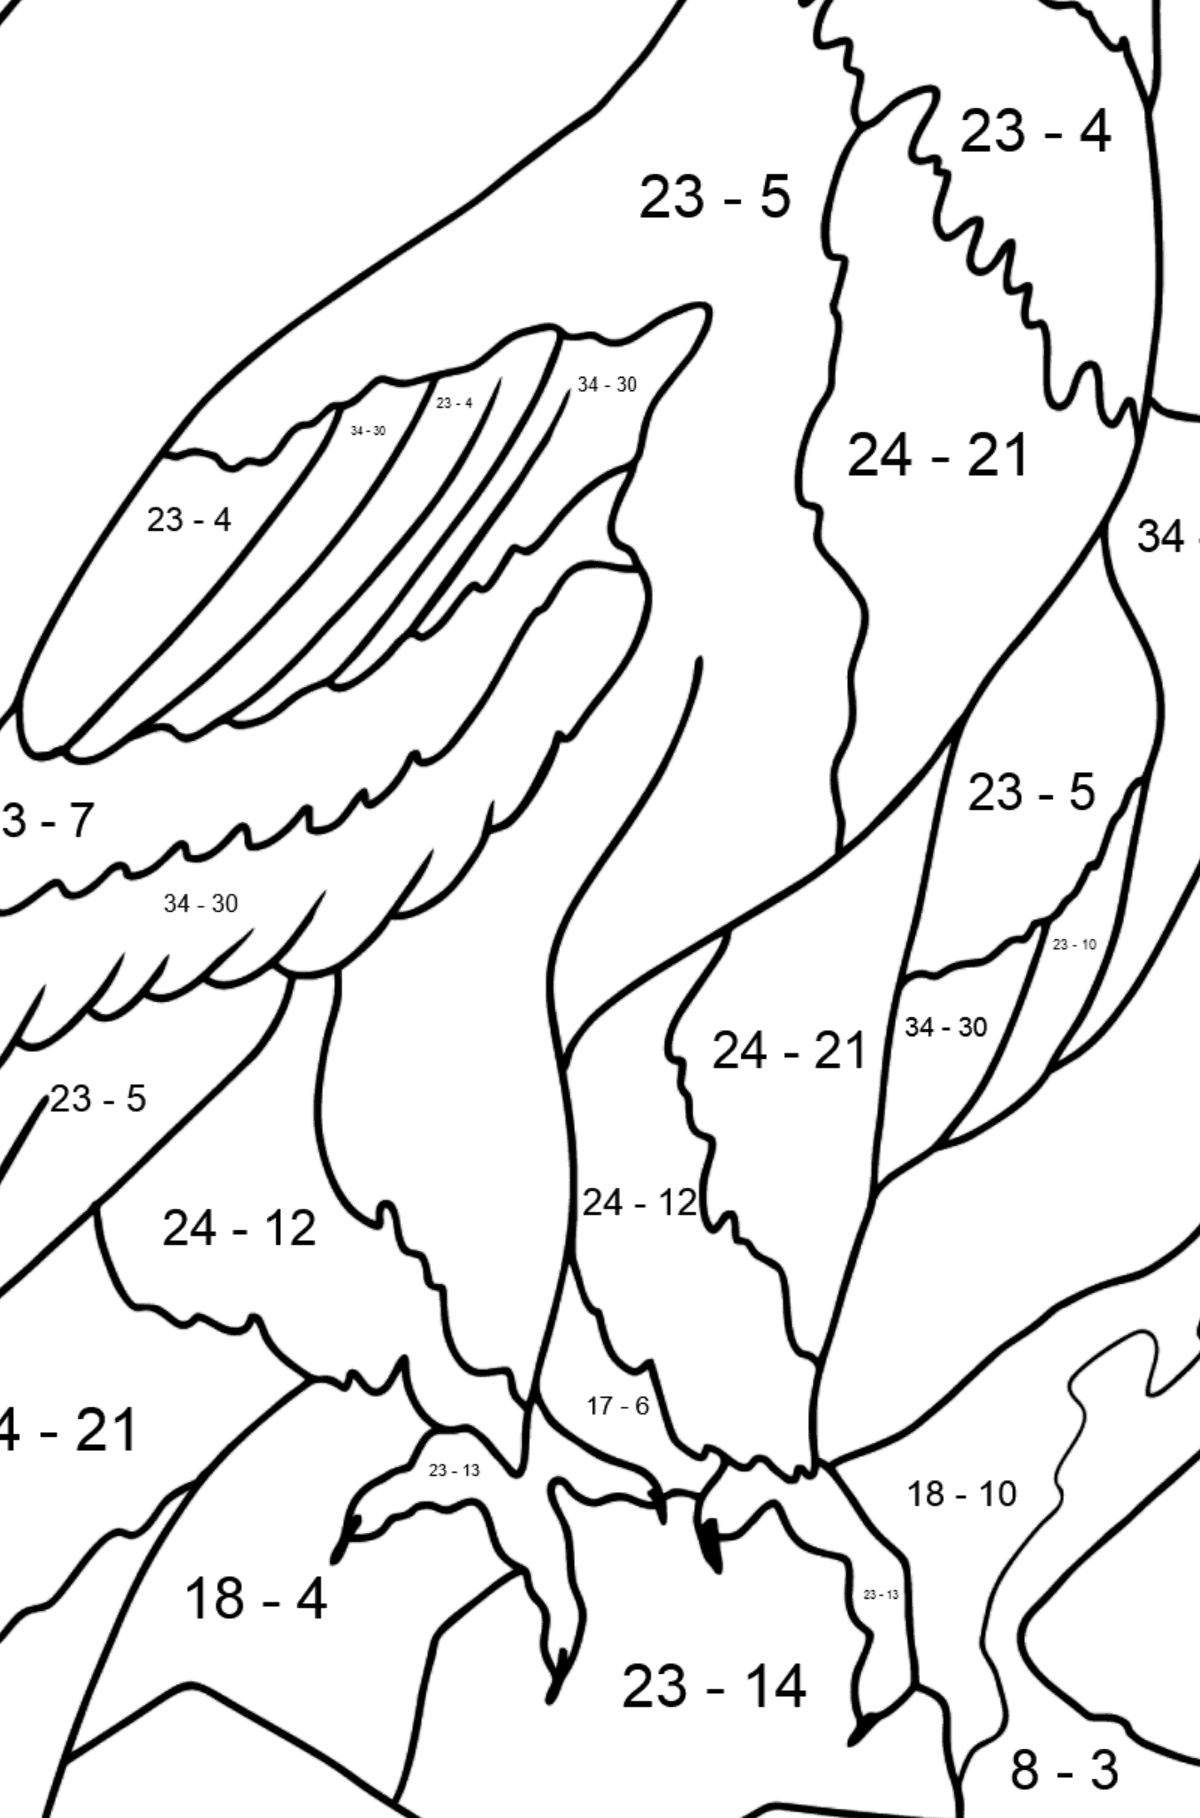 Coloring Page - An Eagle is Looking for Prey - Math Coloring - Subtraction for Kids